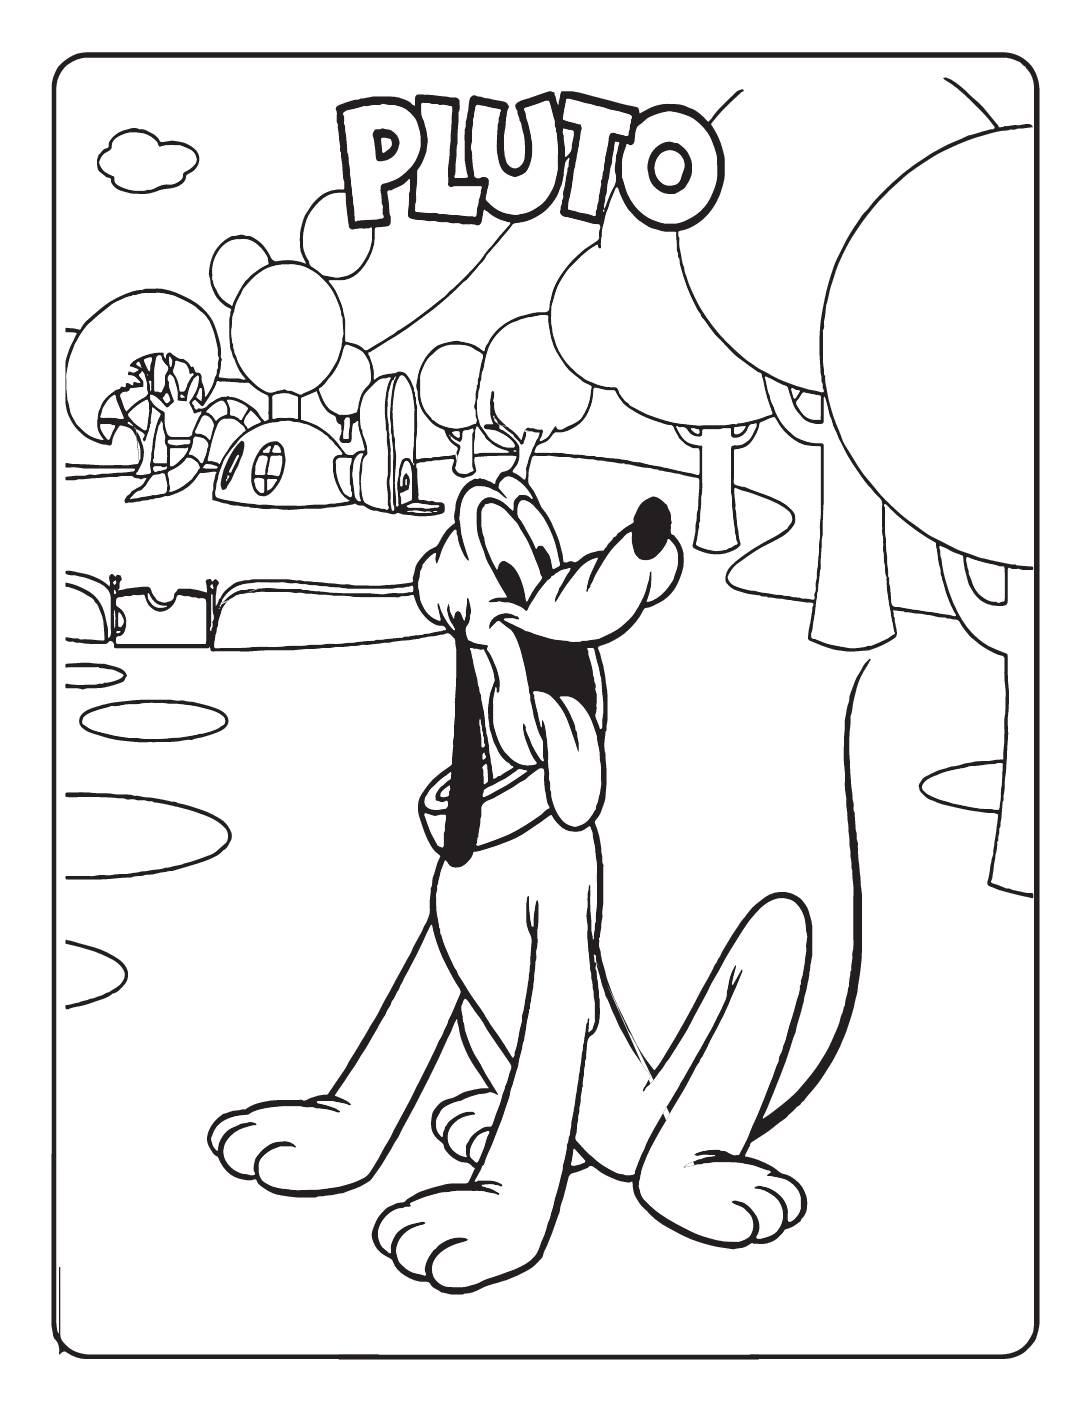 Pluto Coloring Page Coloring Pages